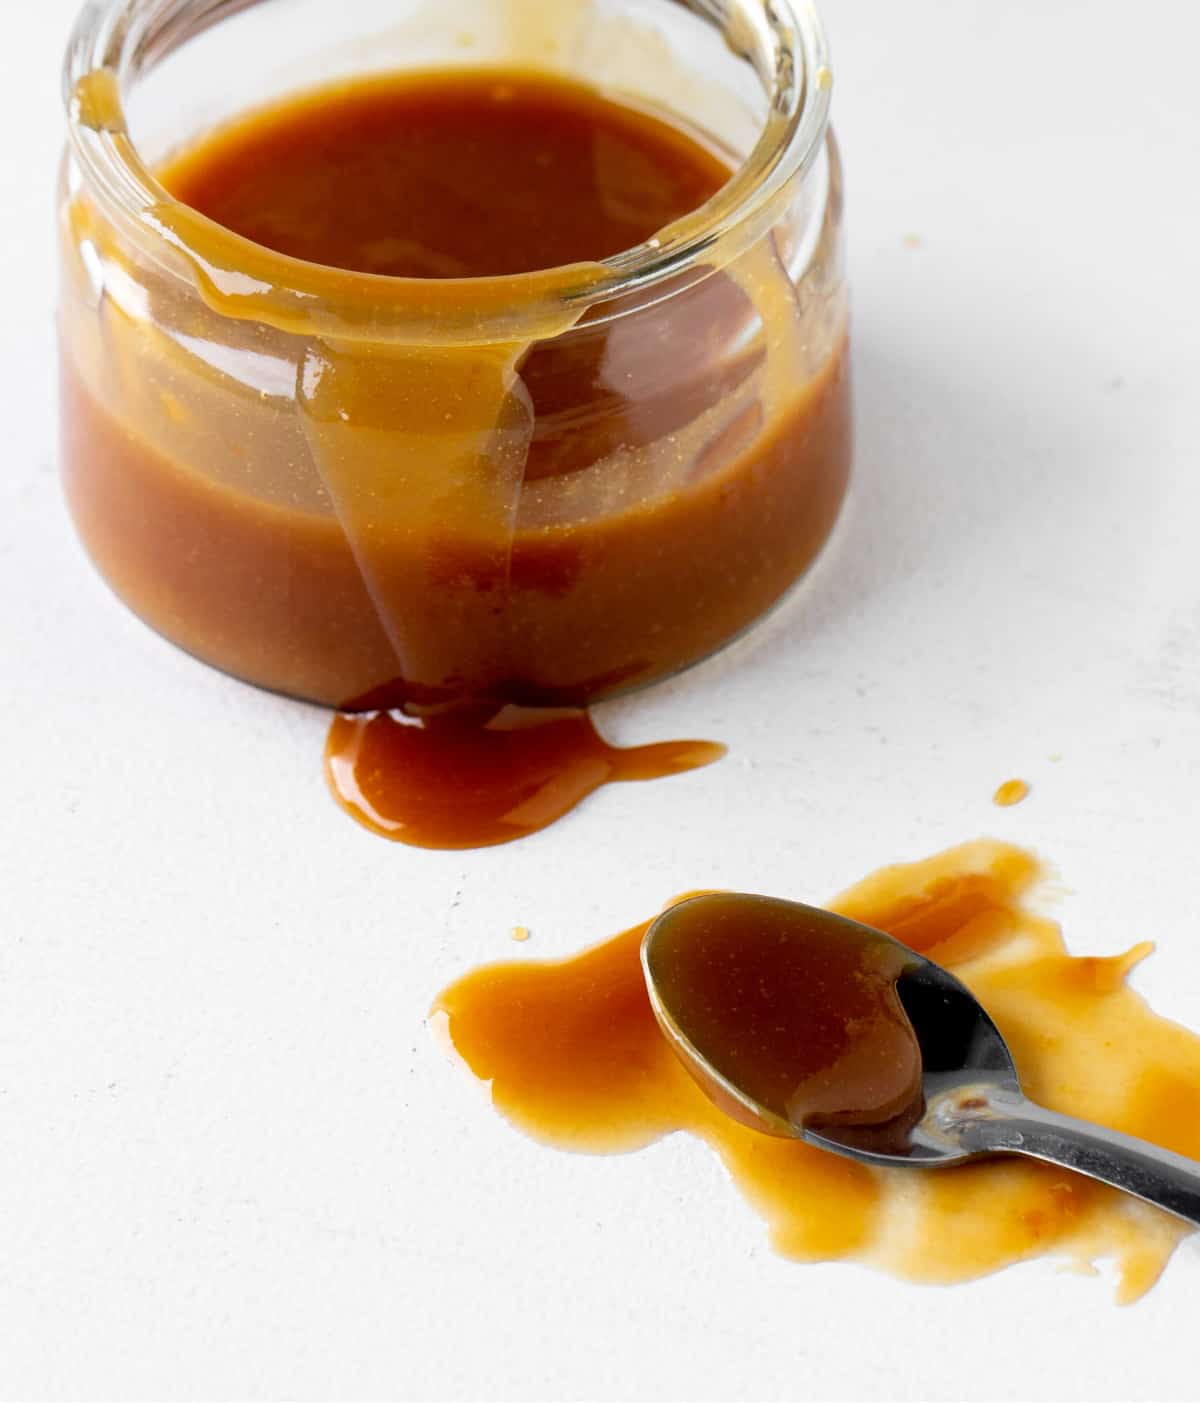 Silver spoon and glass jar dripping dulce de leche on white surface